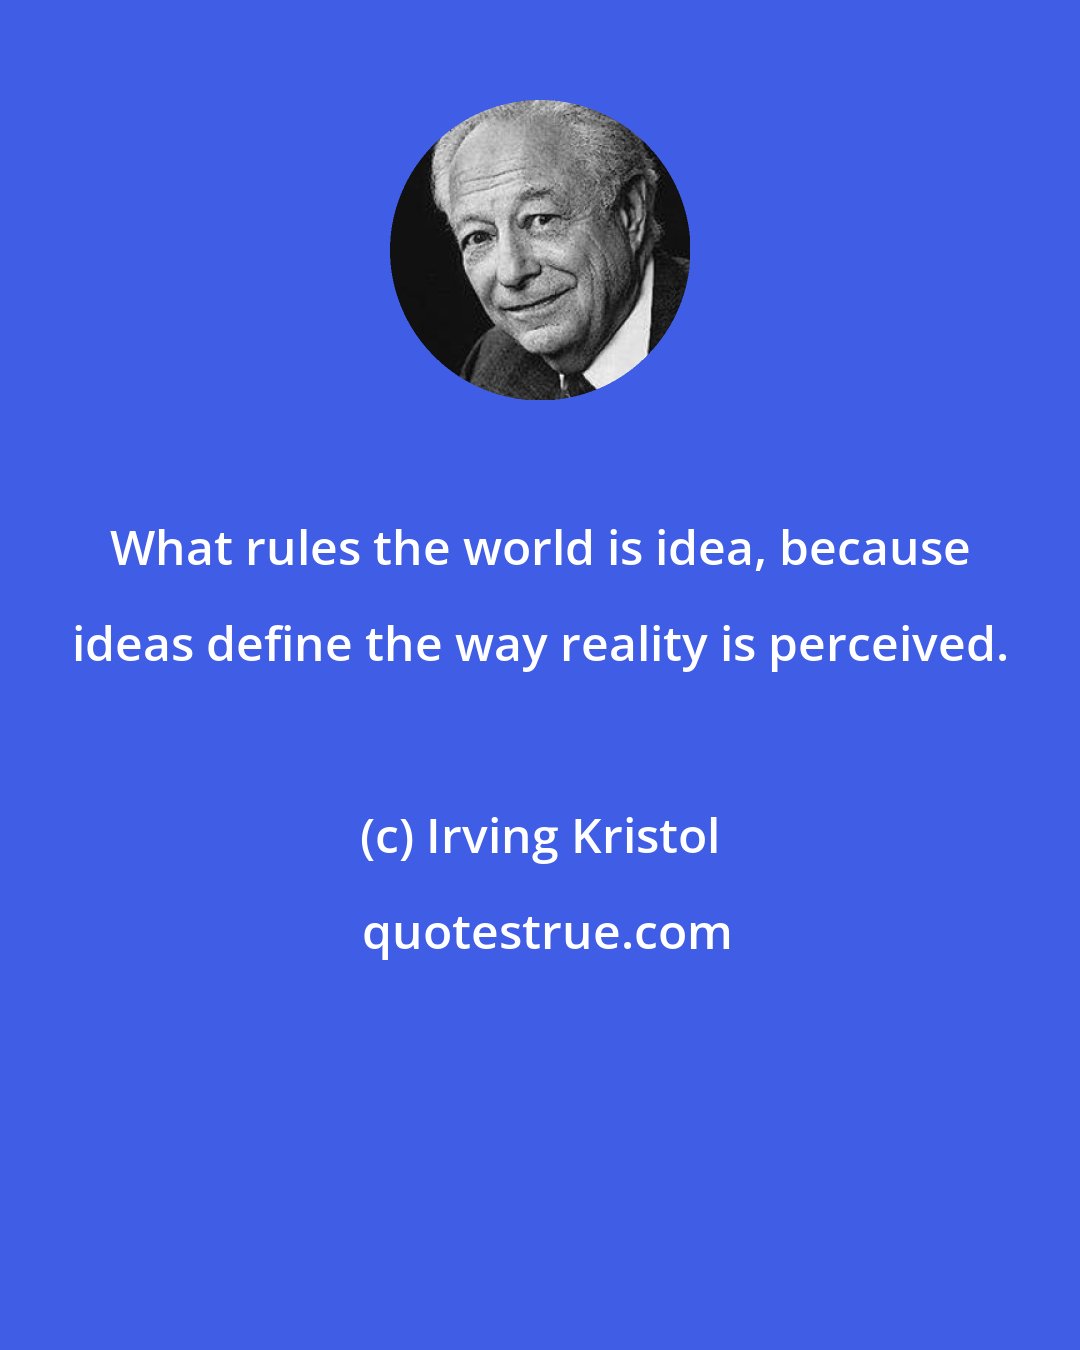 Irving Kristol: What rules the world is idea, because ideas define the way reality is perceived.